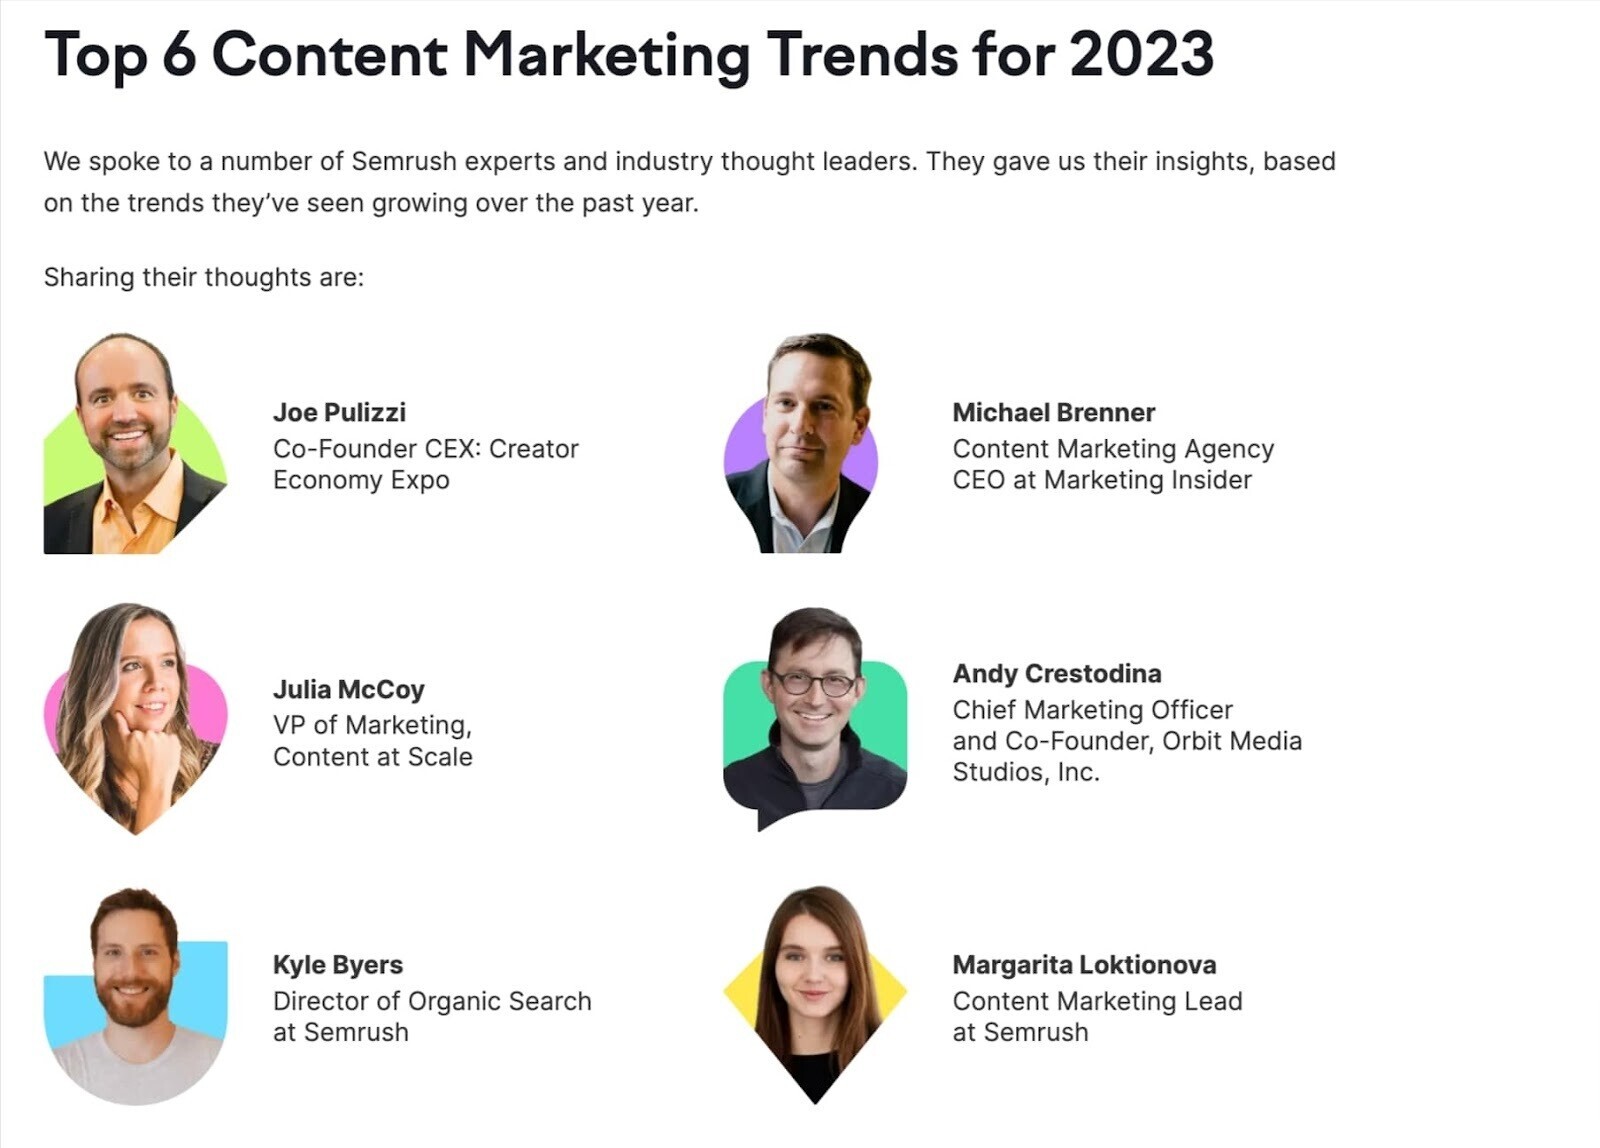 "Top 6 content marketing trends for 2023" section from State of Content Marketing report